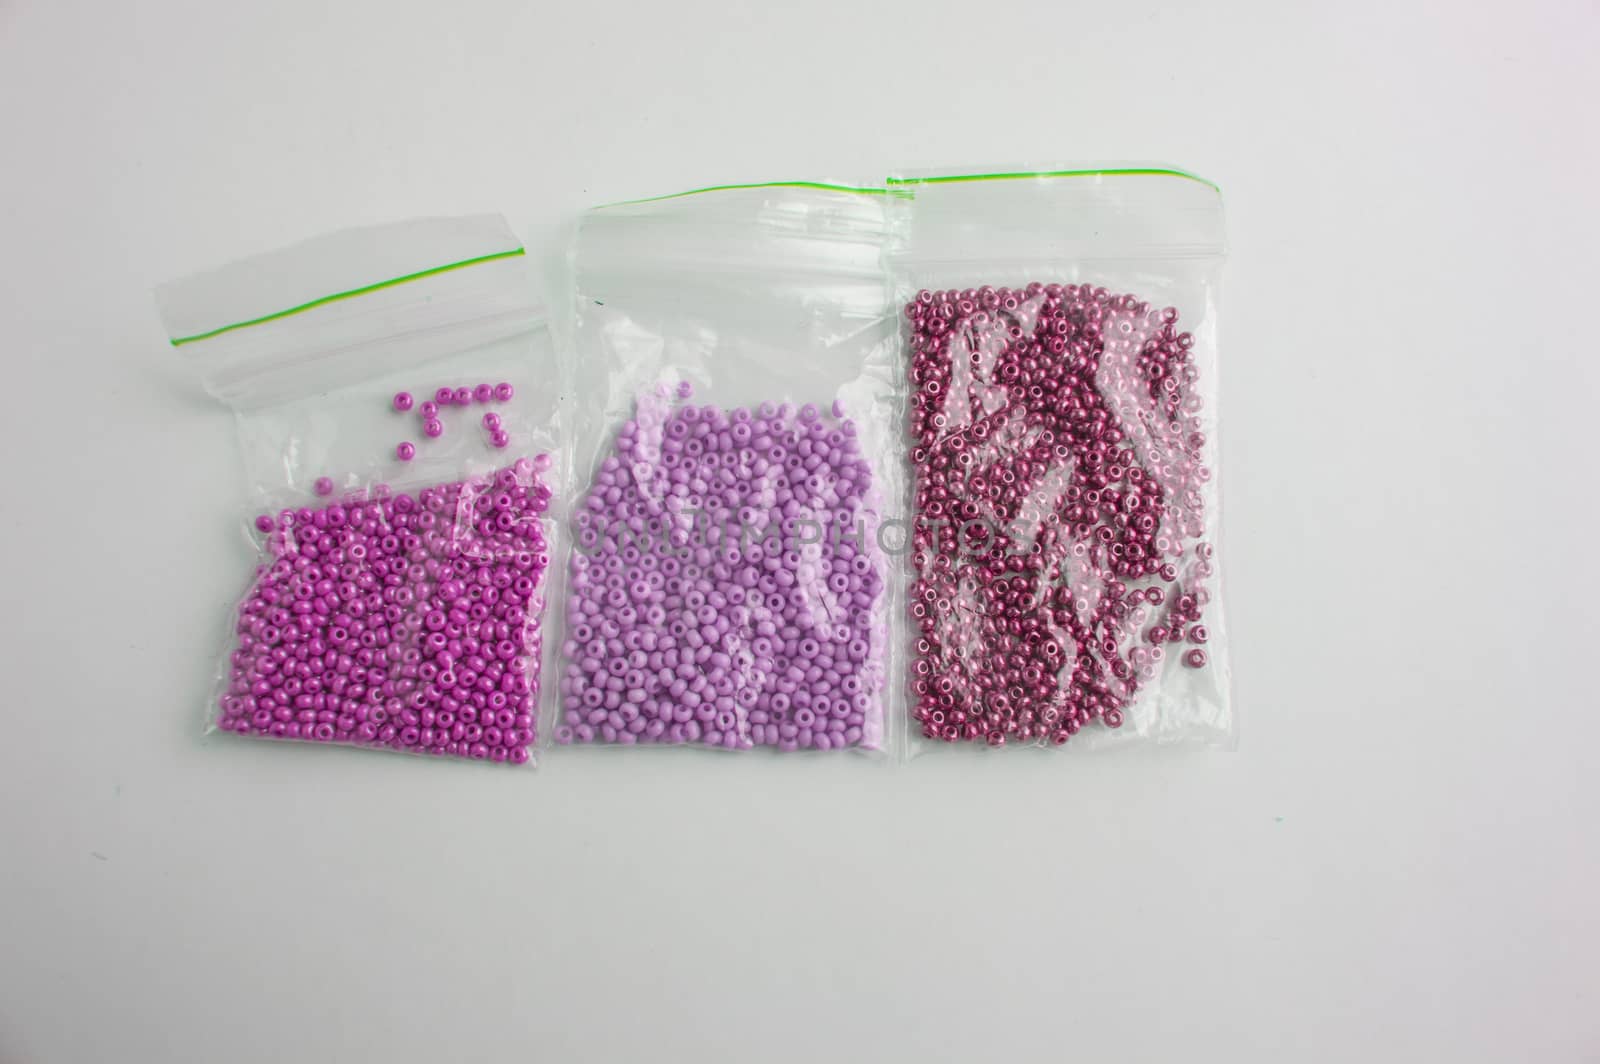 Set of multi-colored beads and beads in a mini plastic bag for embroidery needlework.